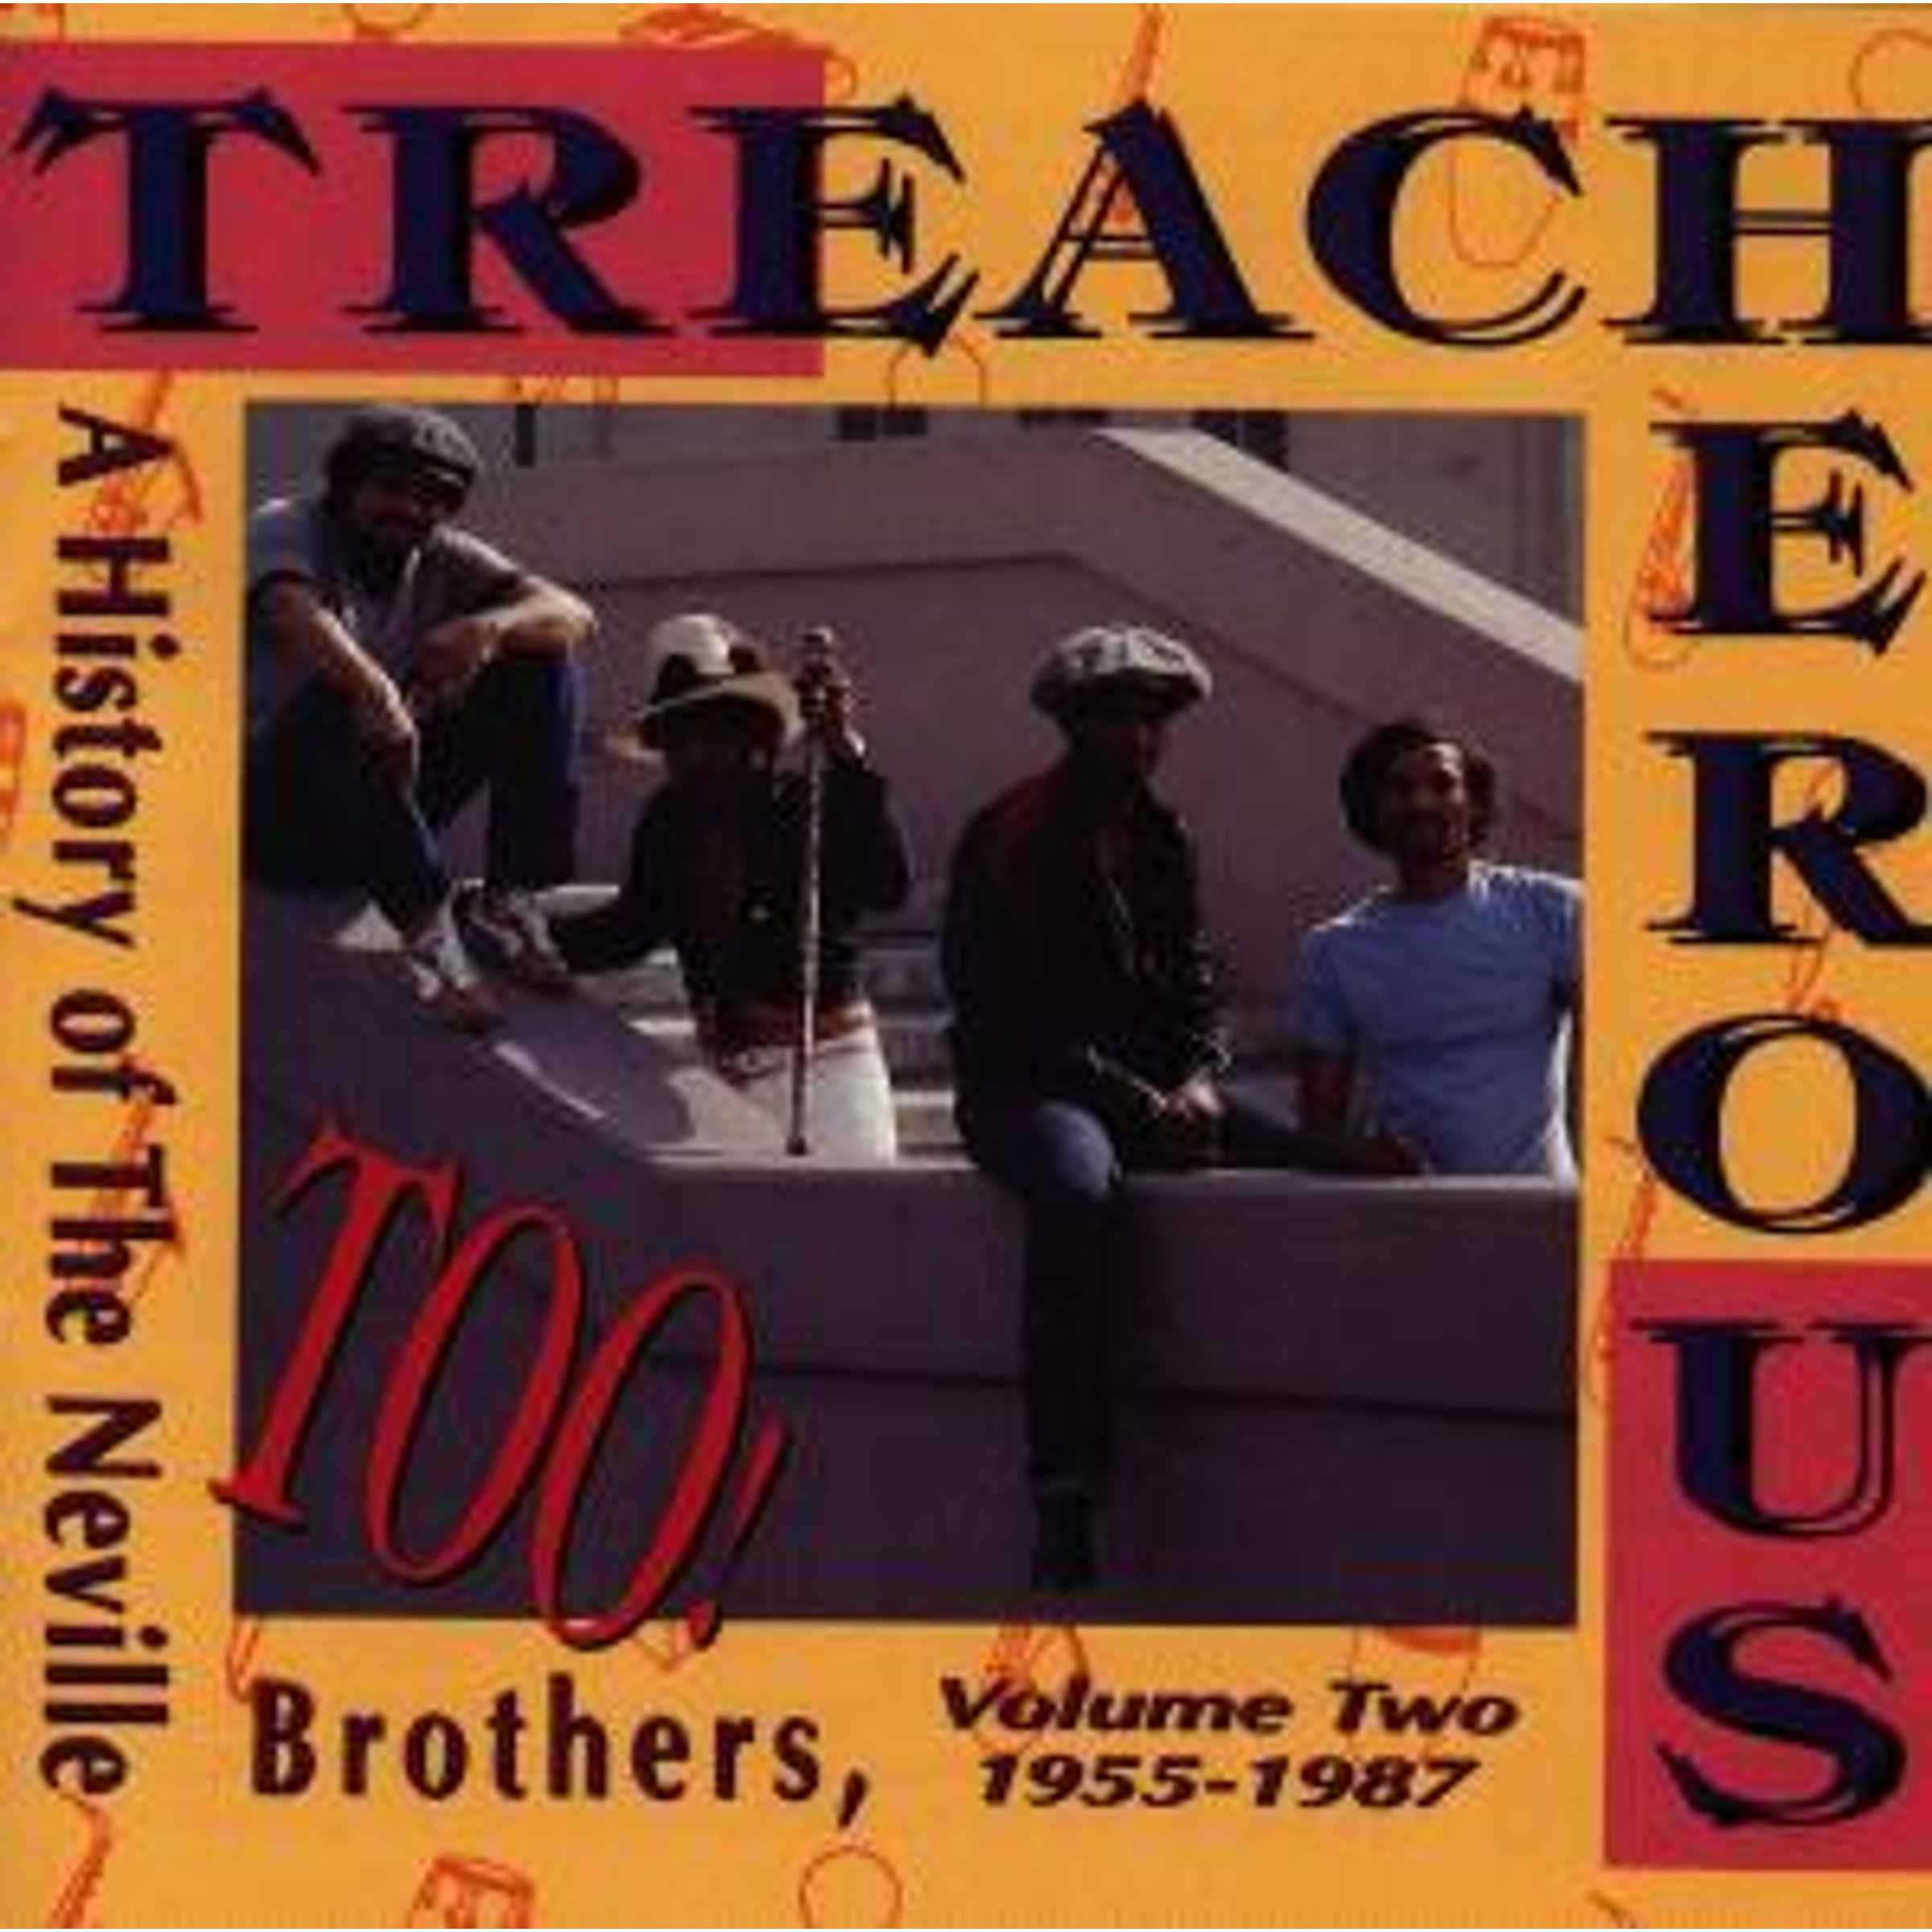 TREACHEROUS TOO! A HISTORY OF THE NEVILLE BROTHERS - VOLUME TWO 1955-1987